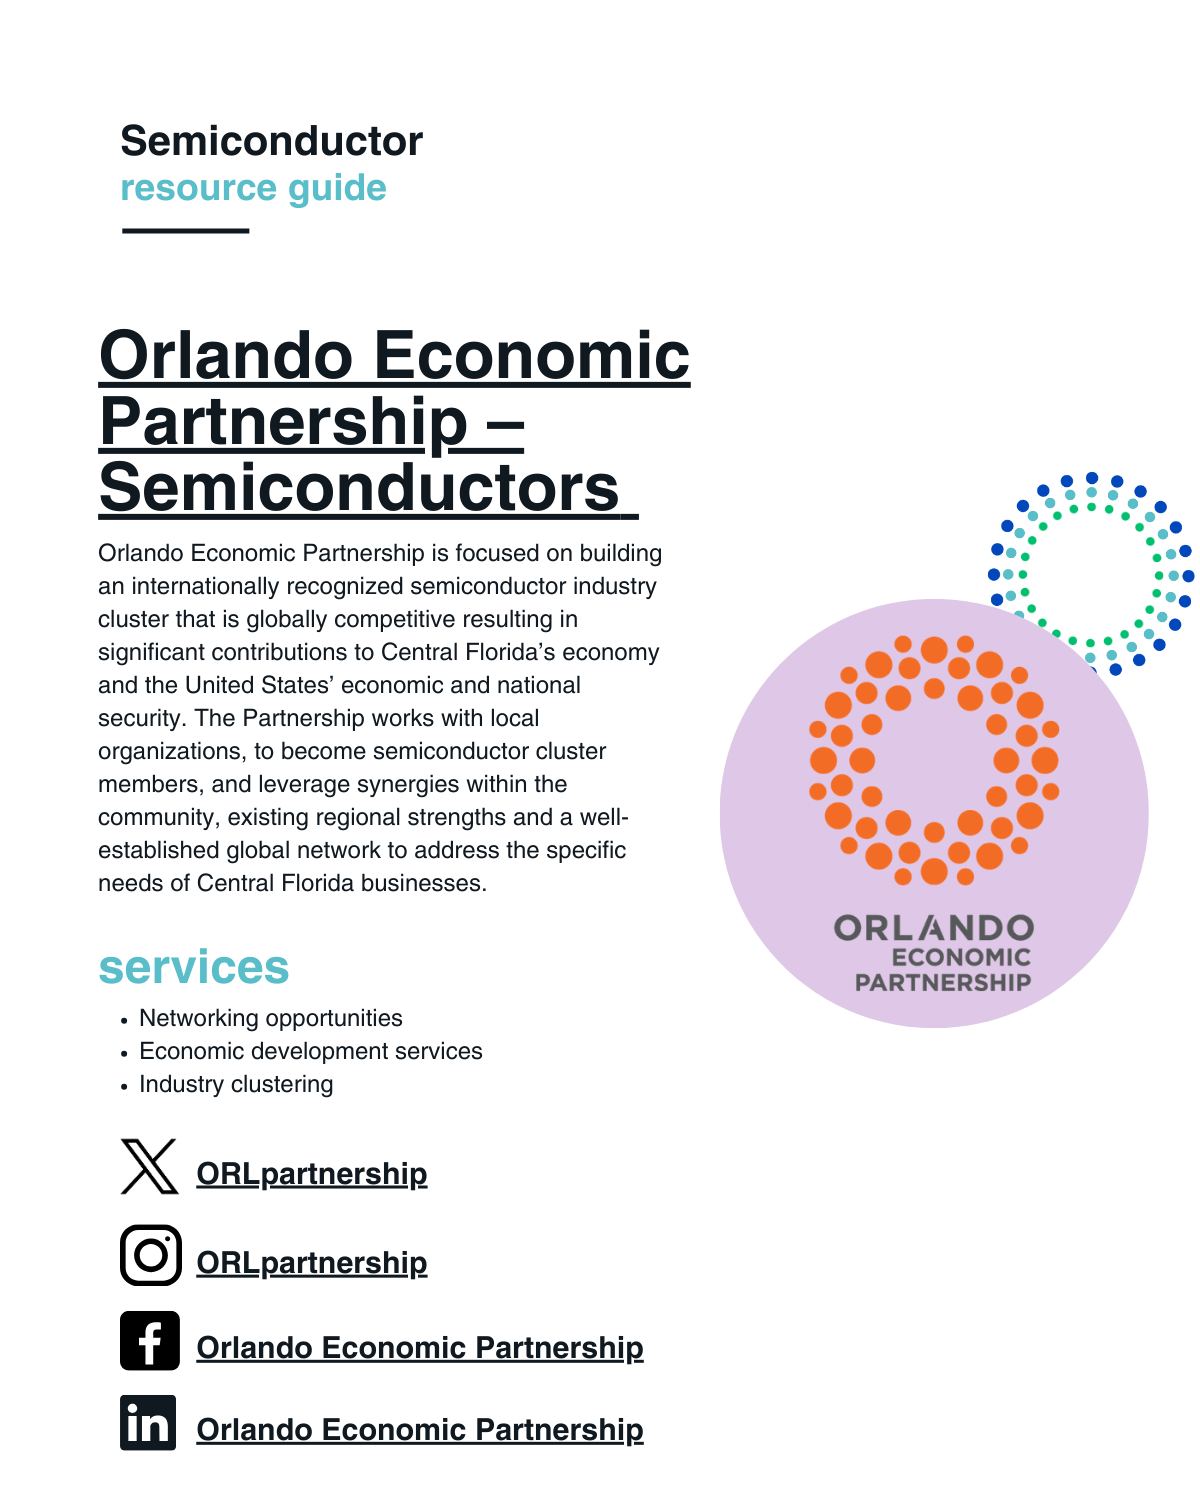 Orlando Economic Partnership is focused on building an internationally recognized semiconductor industry cluster that is globally competitive resulting in significant contributions to Central Florida’s economy and the United States’ economic and national security. The Partnership works with local organizations, to become semiconductor cluster members, and leverage synergies within the community, existing regional strengths and a well-established global network to address the specific needs of Central Florida businesses.